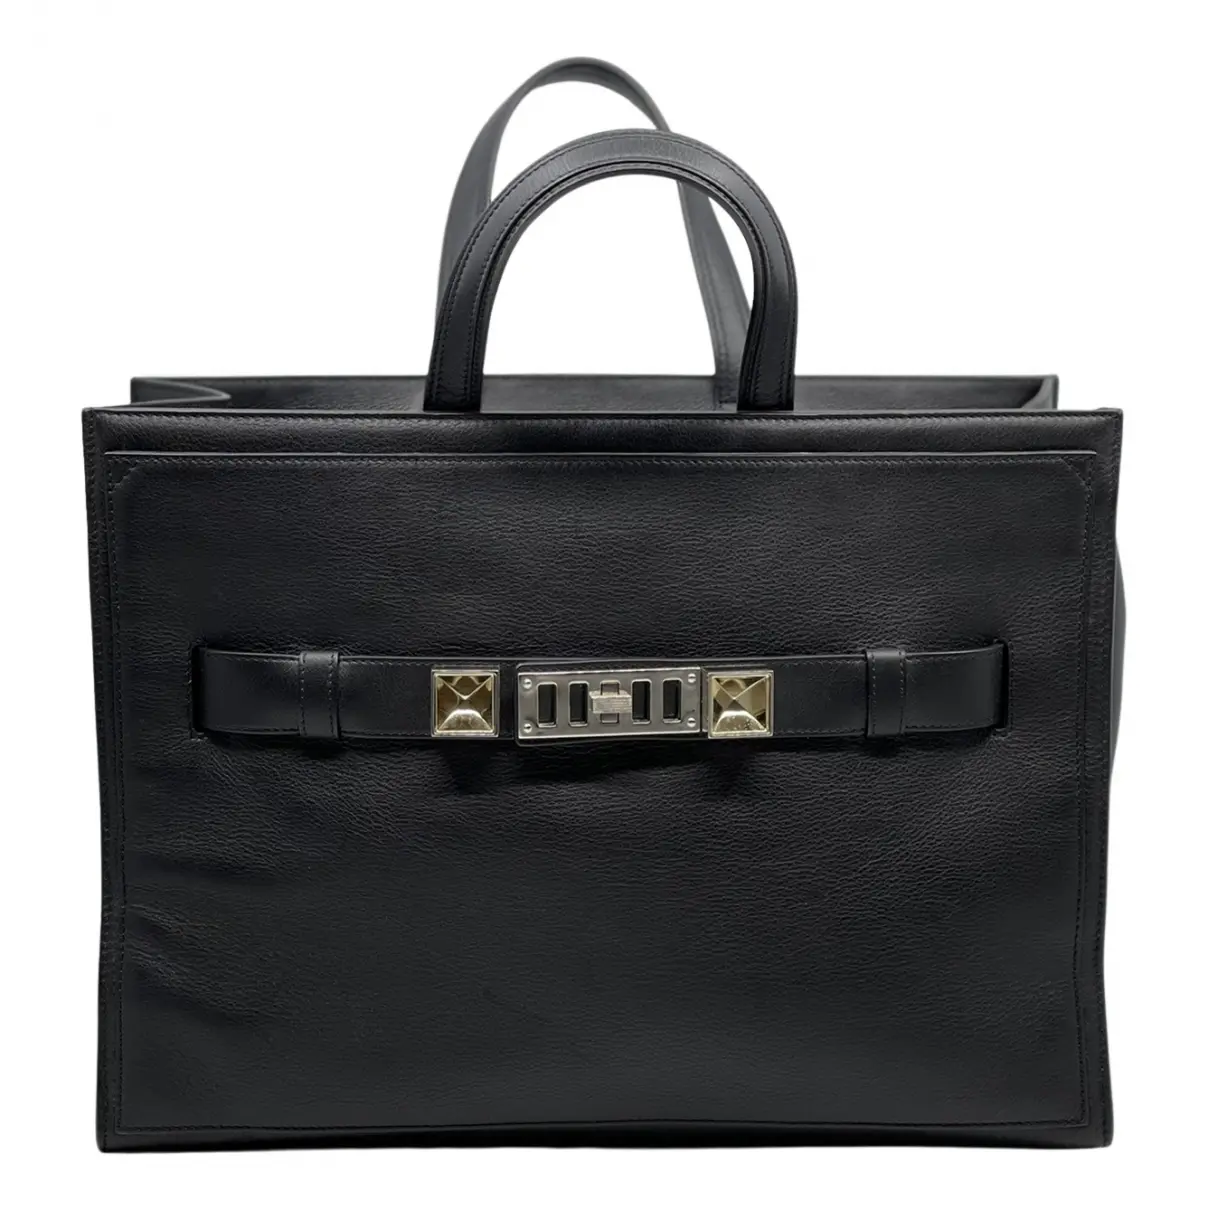 PS11 leather tote Proenza Schouler